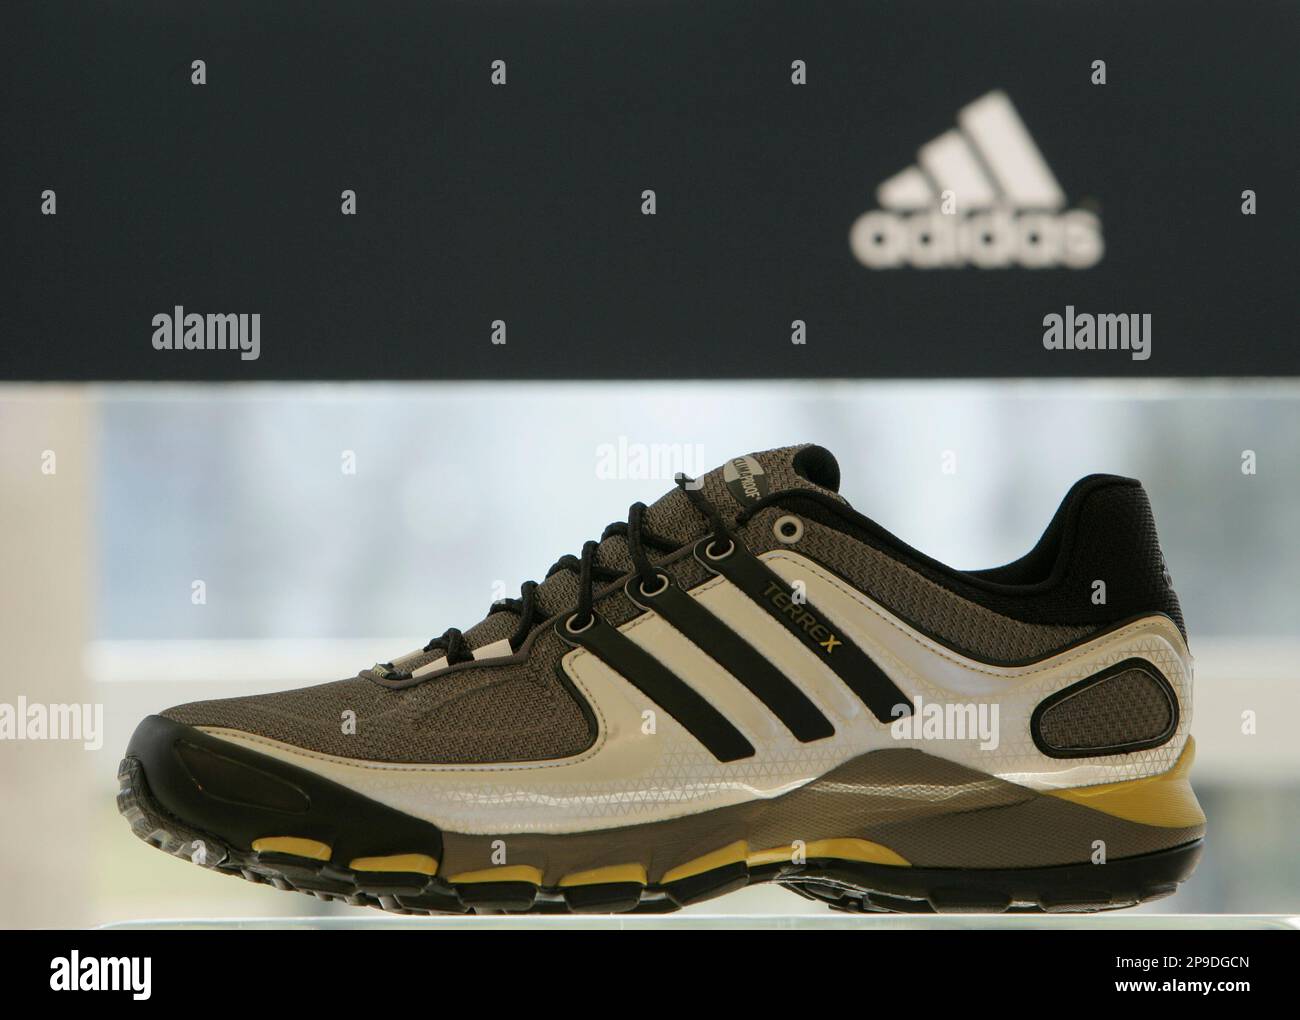 FILE**In this March 5, 2008 file photo a sneaker is displayed in front of  the company's logo of the Adidas Group in Herzogenaurach, southern Germany.  Sportswear company Adidas AG has signed an